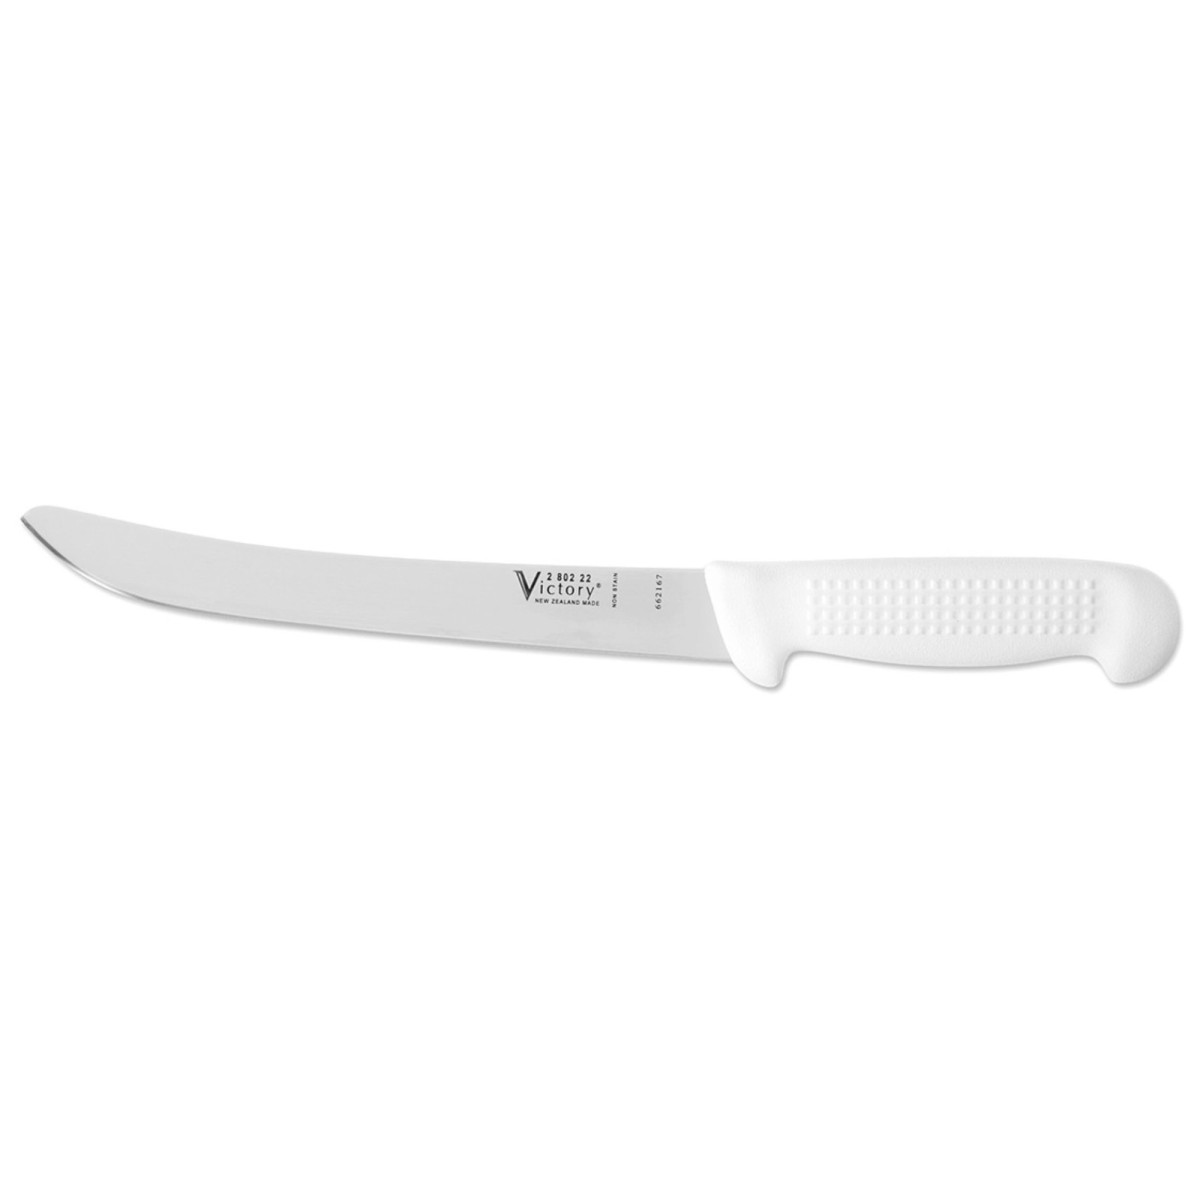 KNIFE VICTORY FISH FILLETING 2-802-22